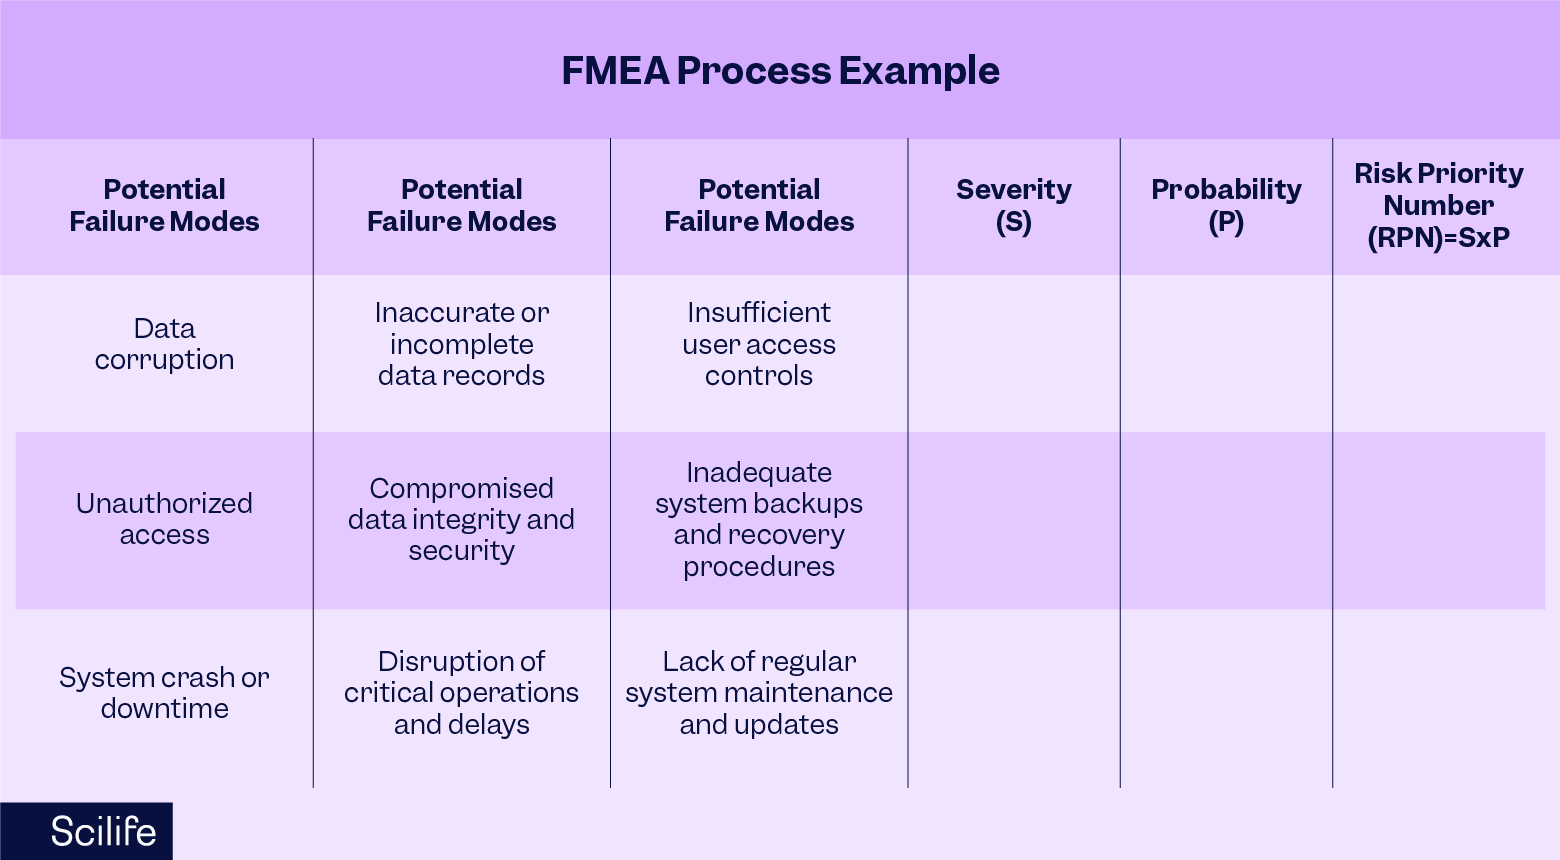 A FMEA process example table showing potential failure modes in quality management and their severity and probability | Scilife